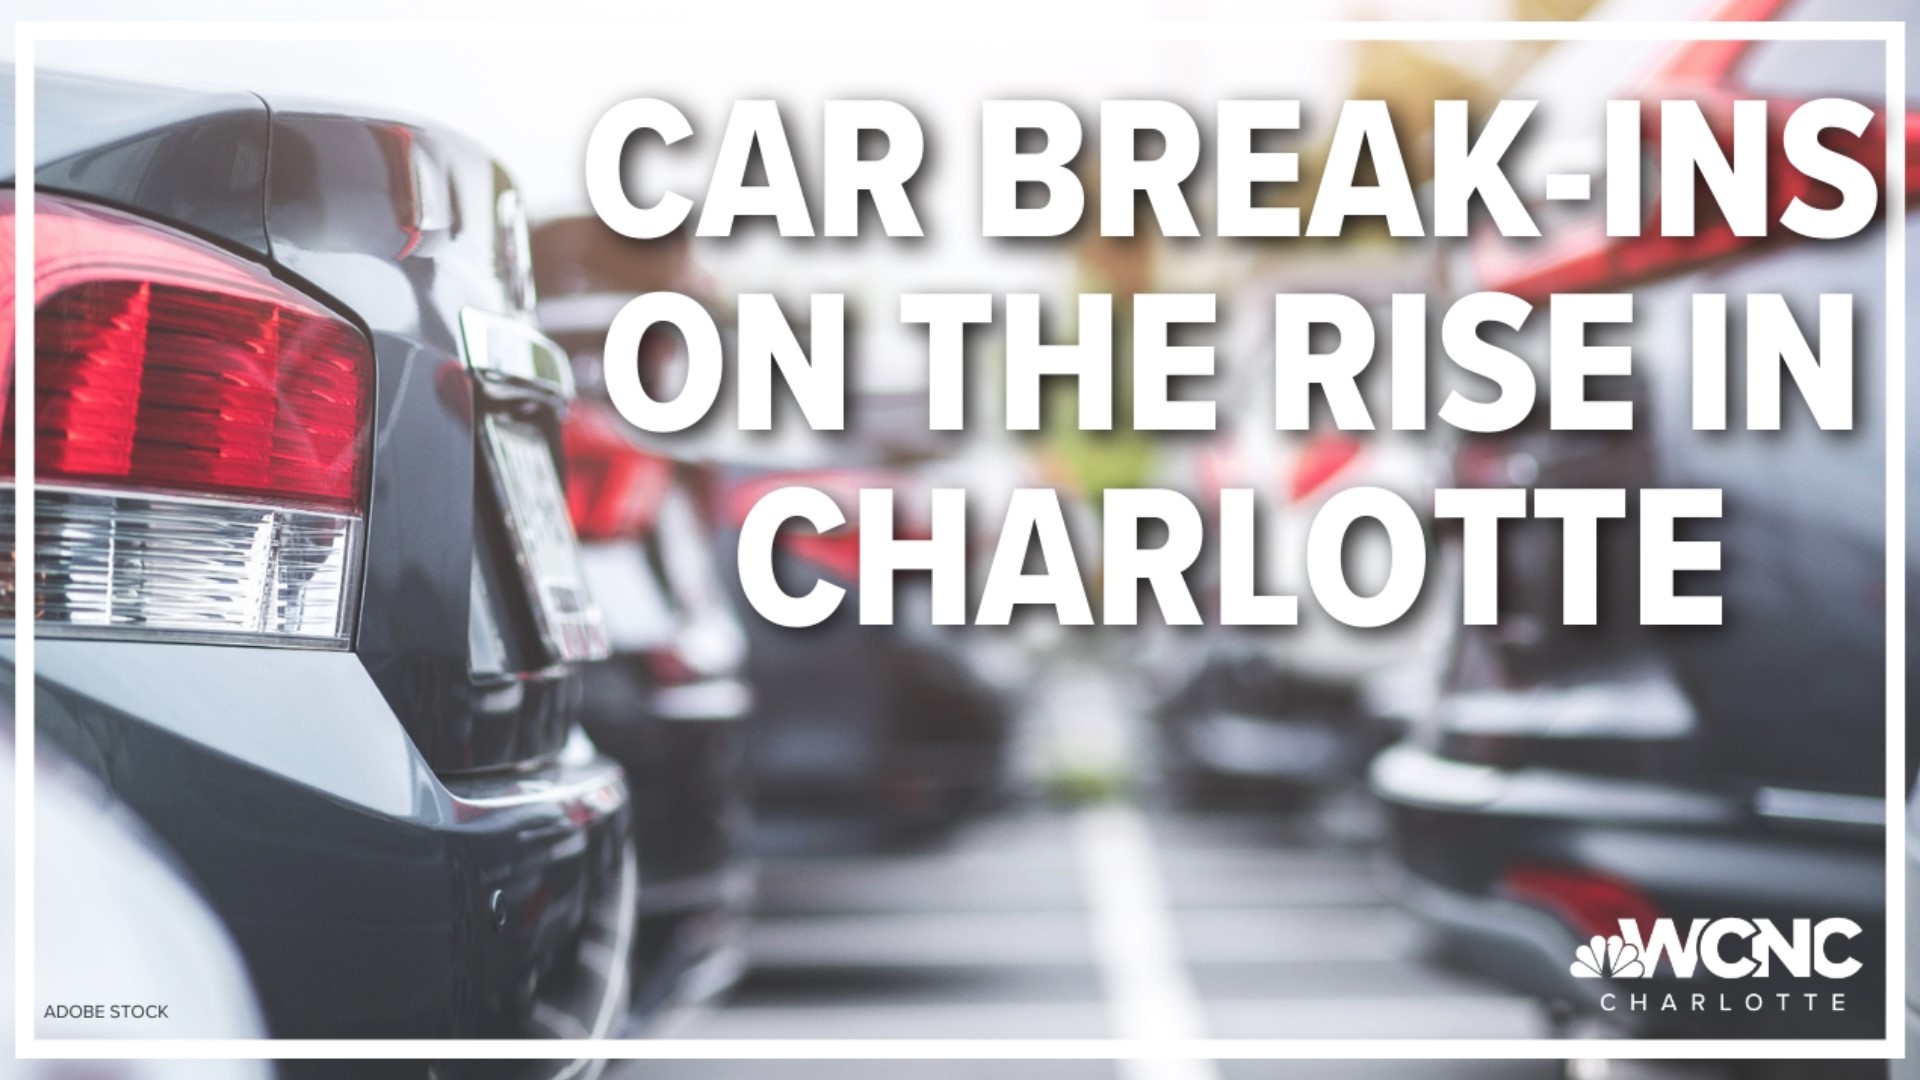 UNC Charlotte said over the past week they have experienced a series of auto break-ins in one of their parking decks.